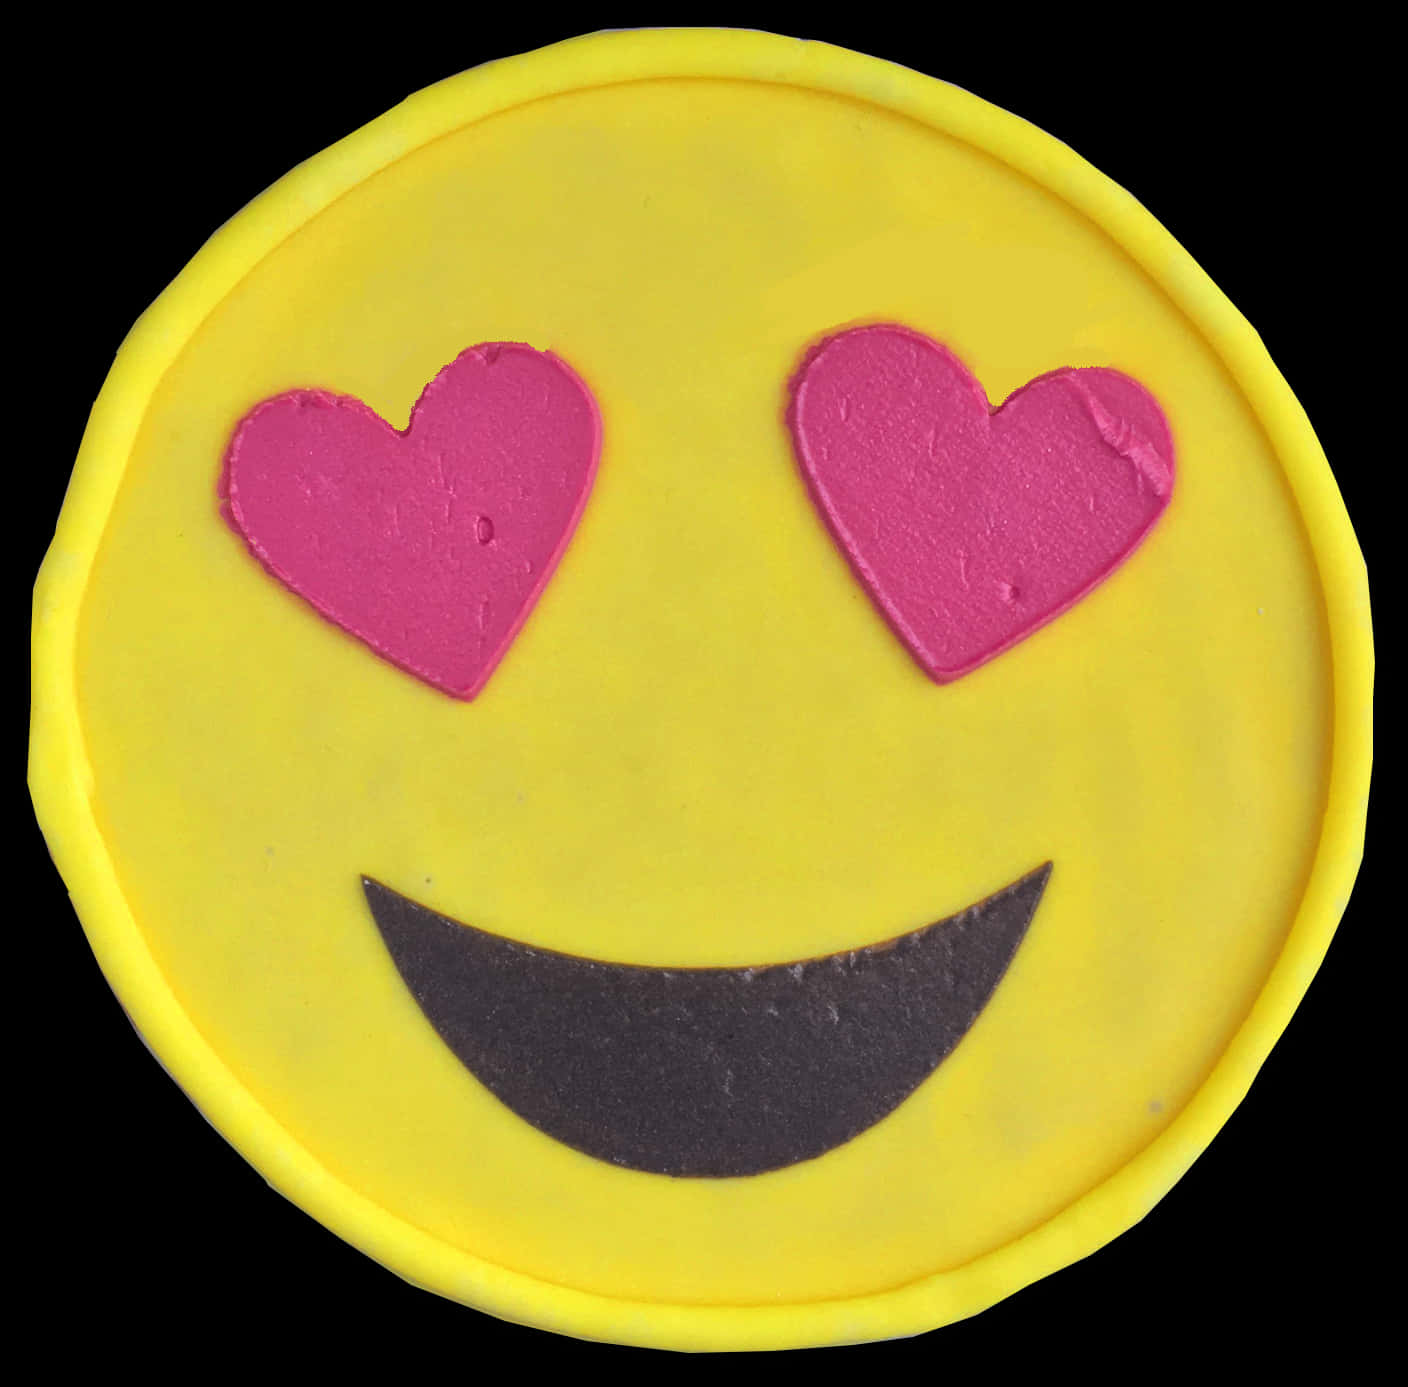 A Yellow Smiley Face With Pink Hearts On It